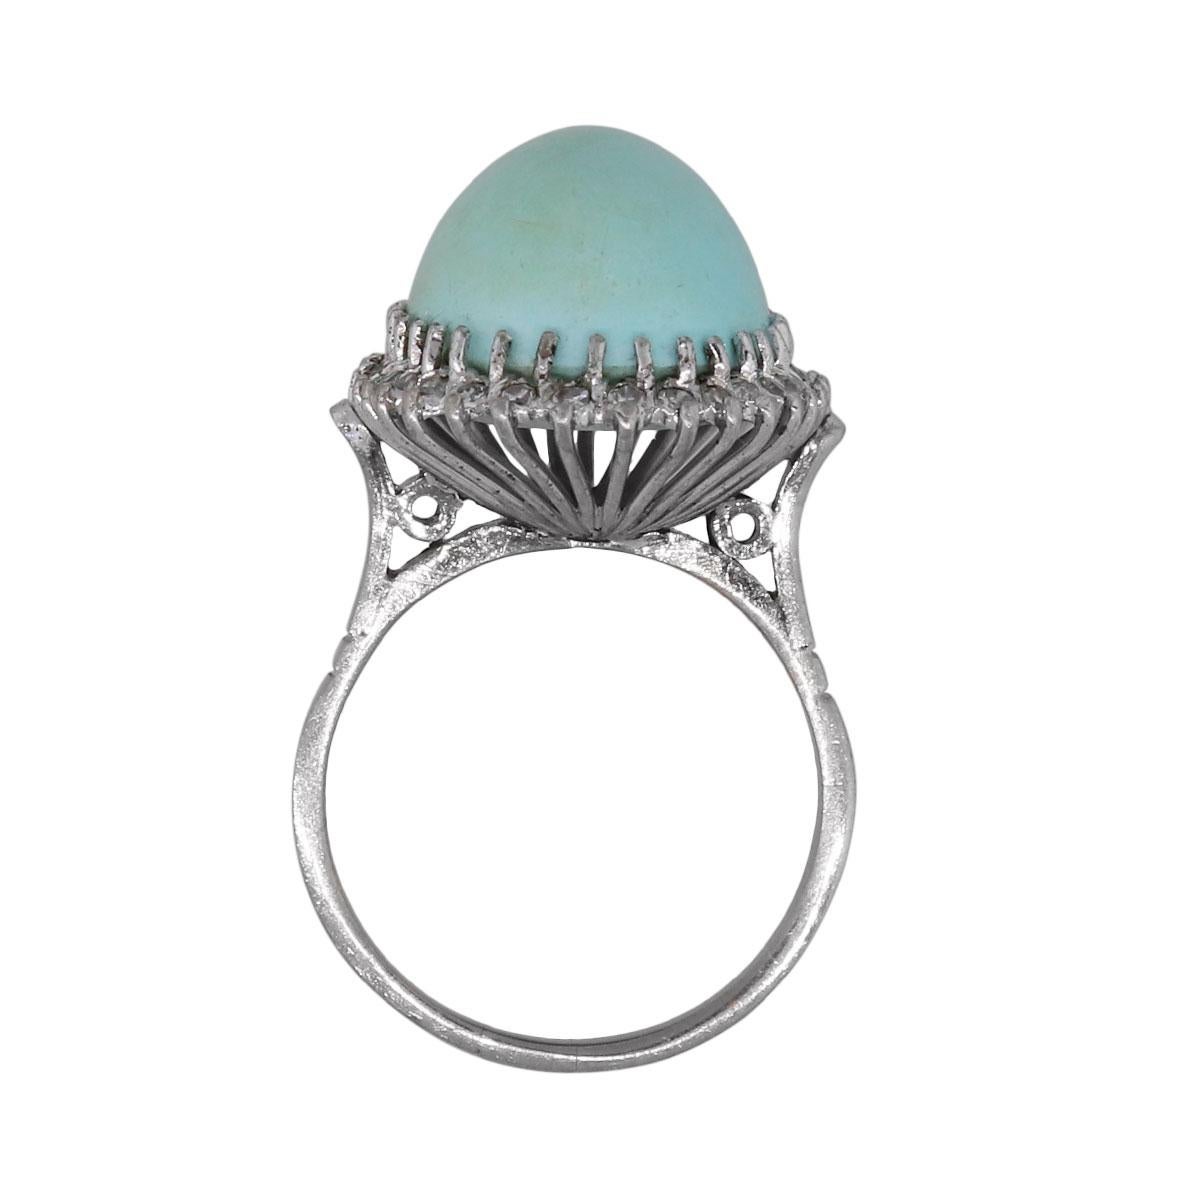 Material: 18k white gold
Diamond Details: Approximately 0.64ctw of round brilliant diamonds and baguette shape diamonds. Diamonds are G/H in color and SI in clarity
Gemstone Details: Oval cabochon shape turquoise is approximately 17.63ct.
Ring Size: